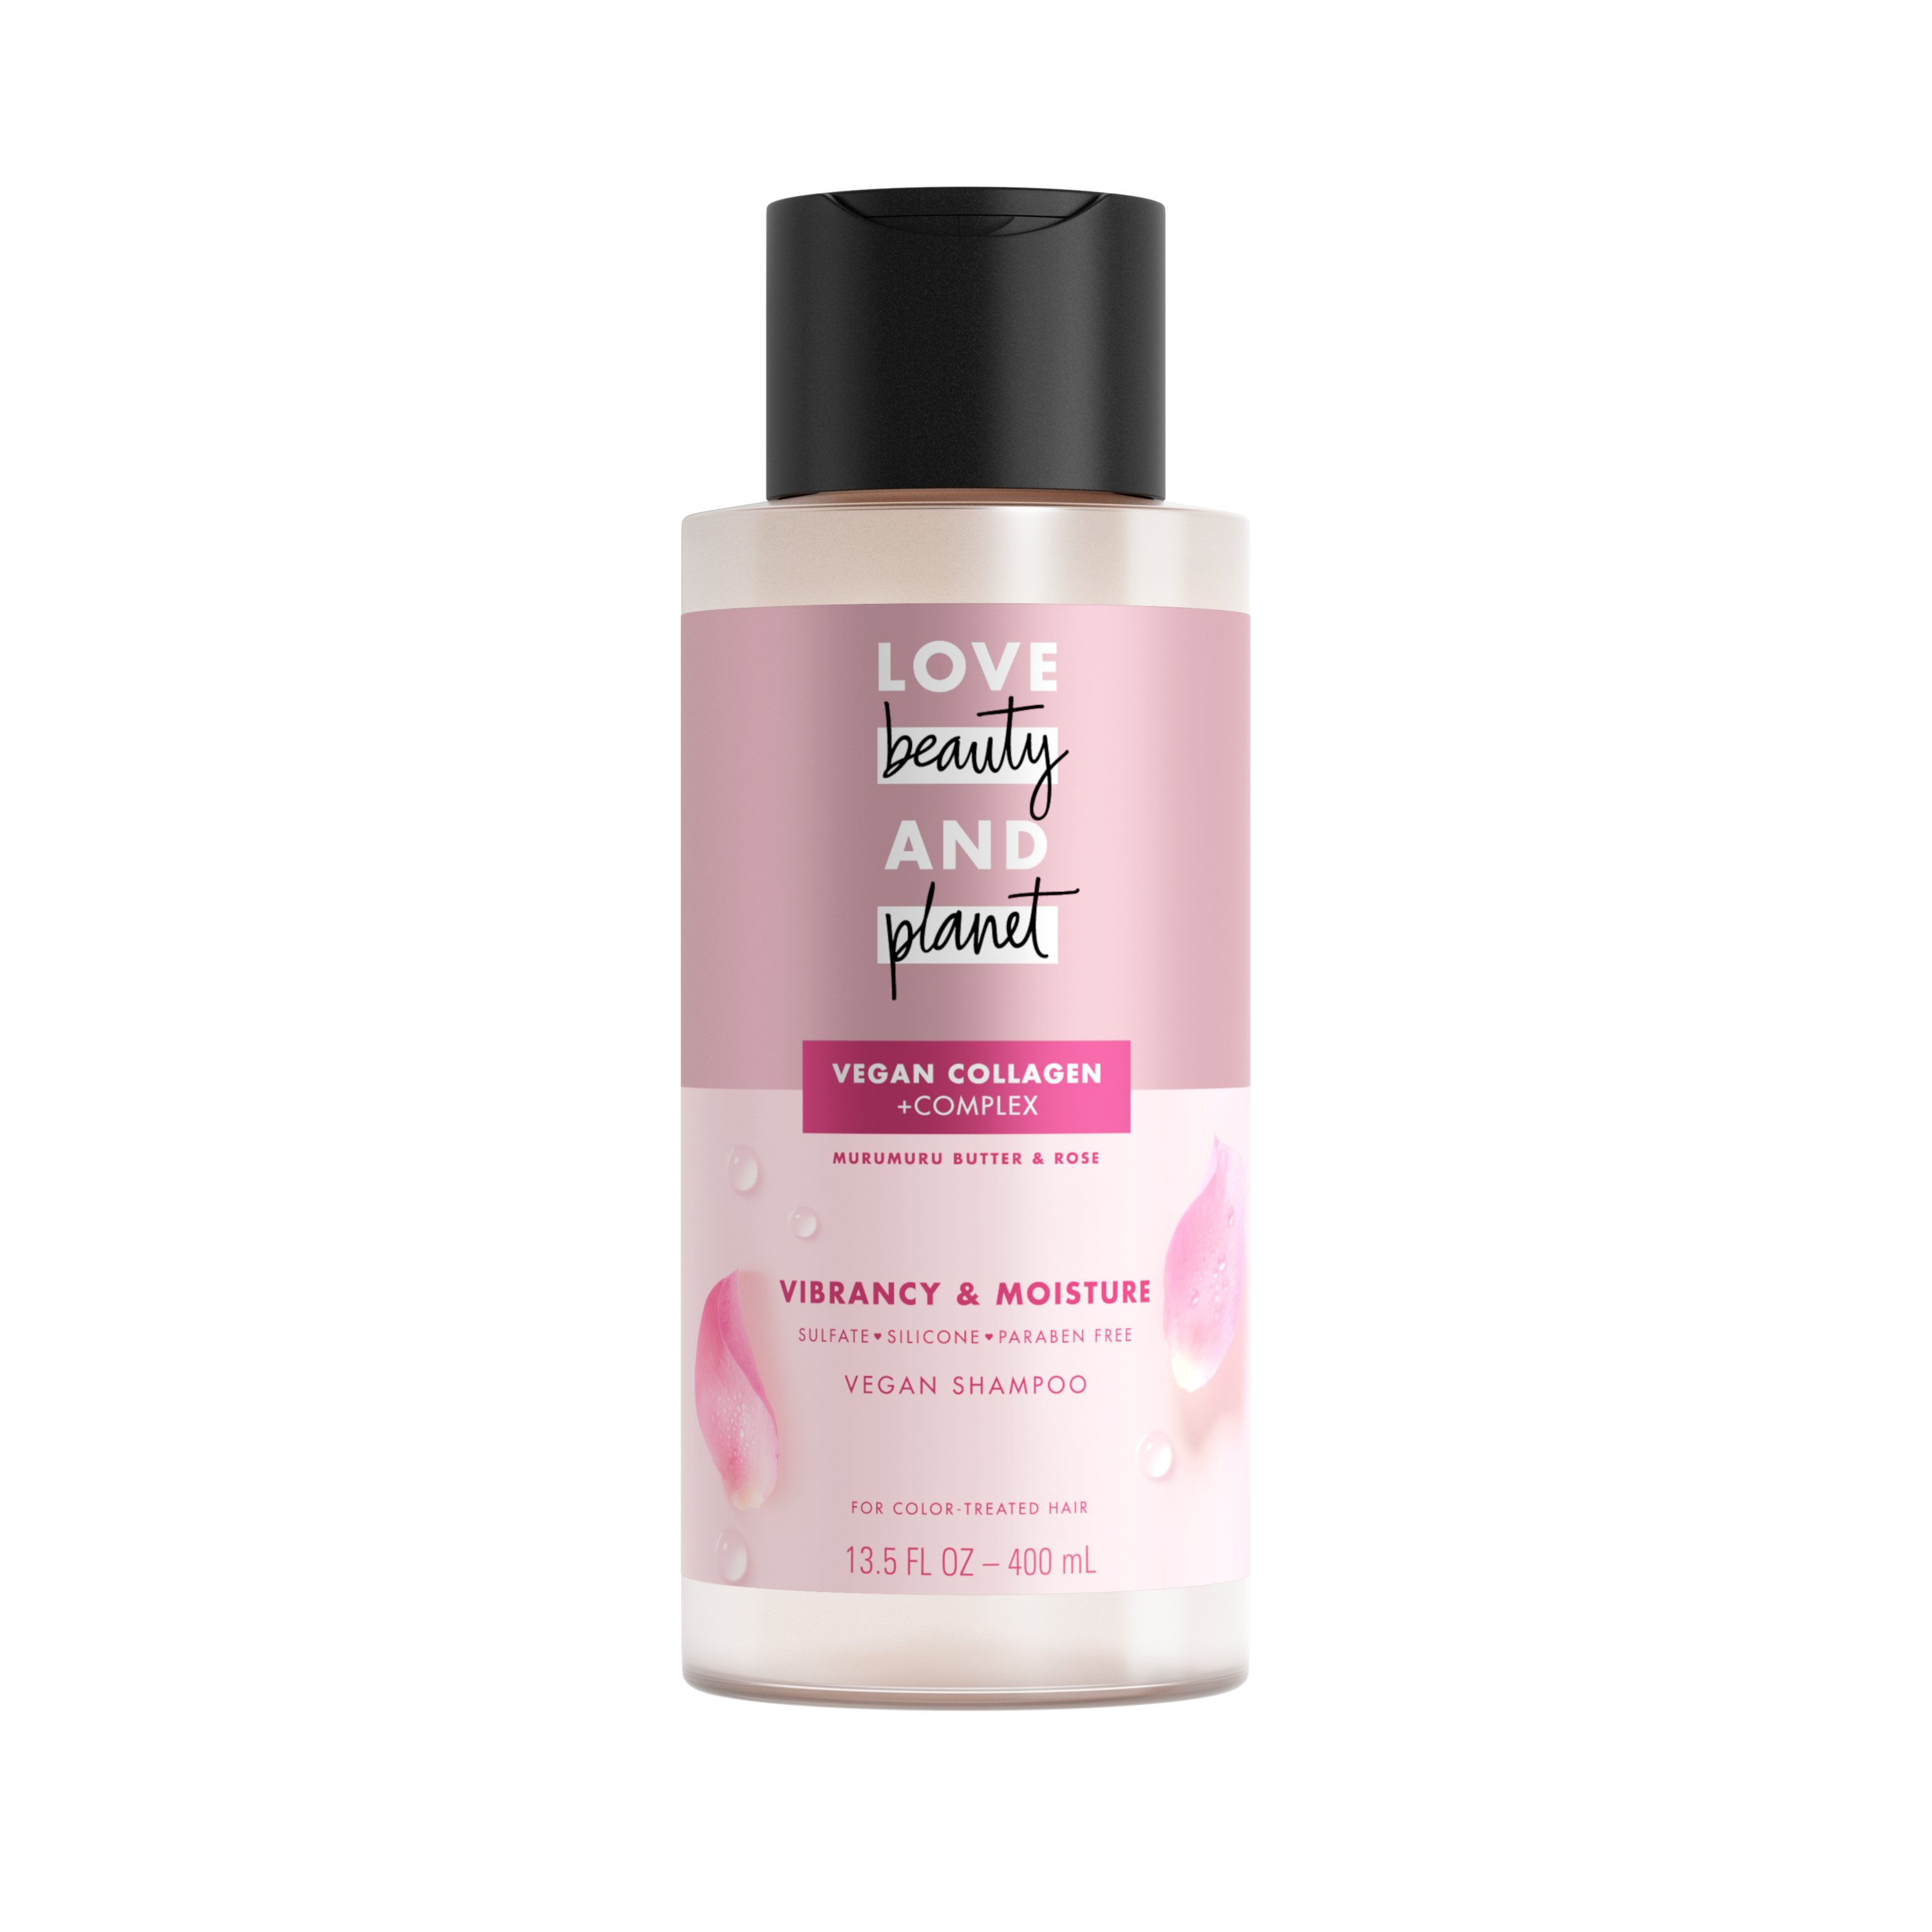 LOVE beauty AND planet Murumuru Butter & Rose Body Lotion 3 Ct